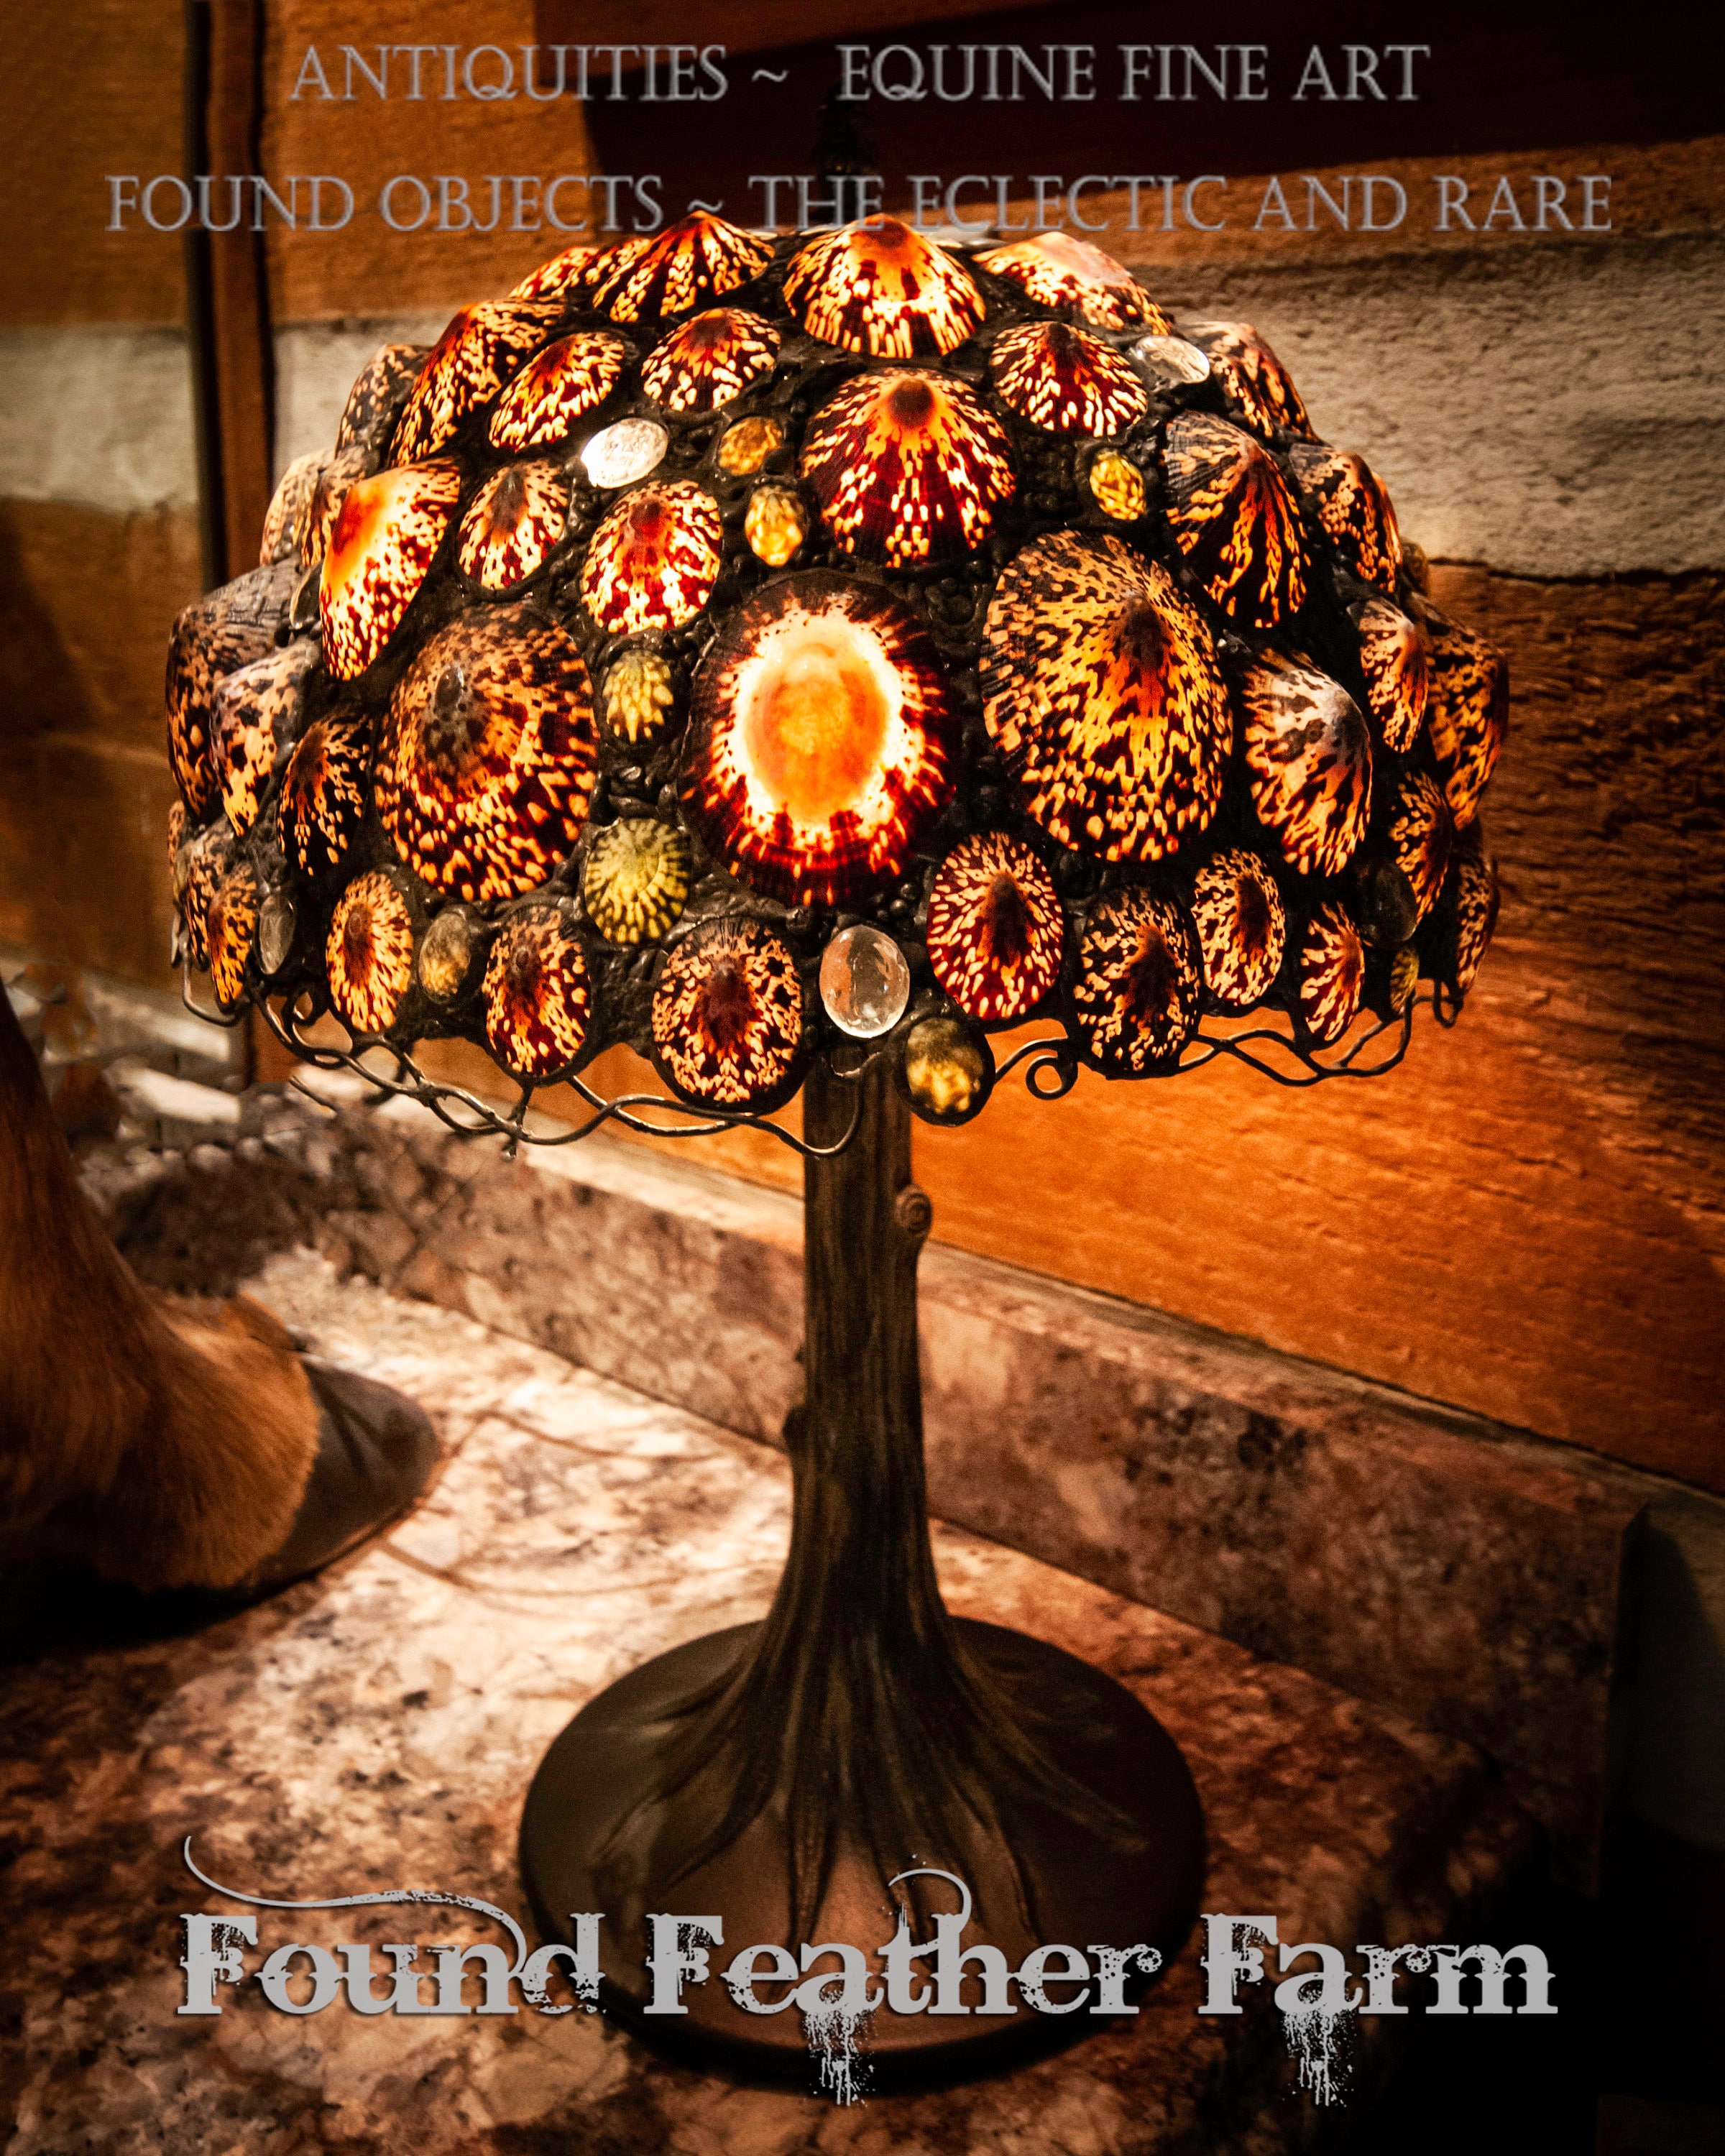 Gorgeous One of a Kind Seashell Lamp Designed and Made Entirely by Hand